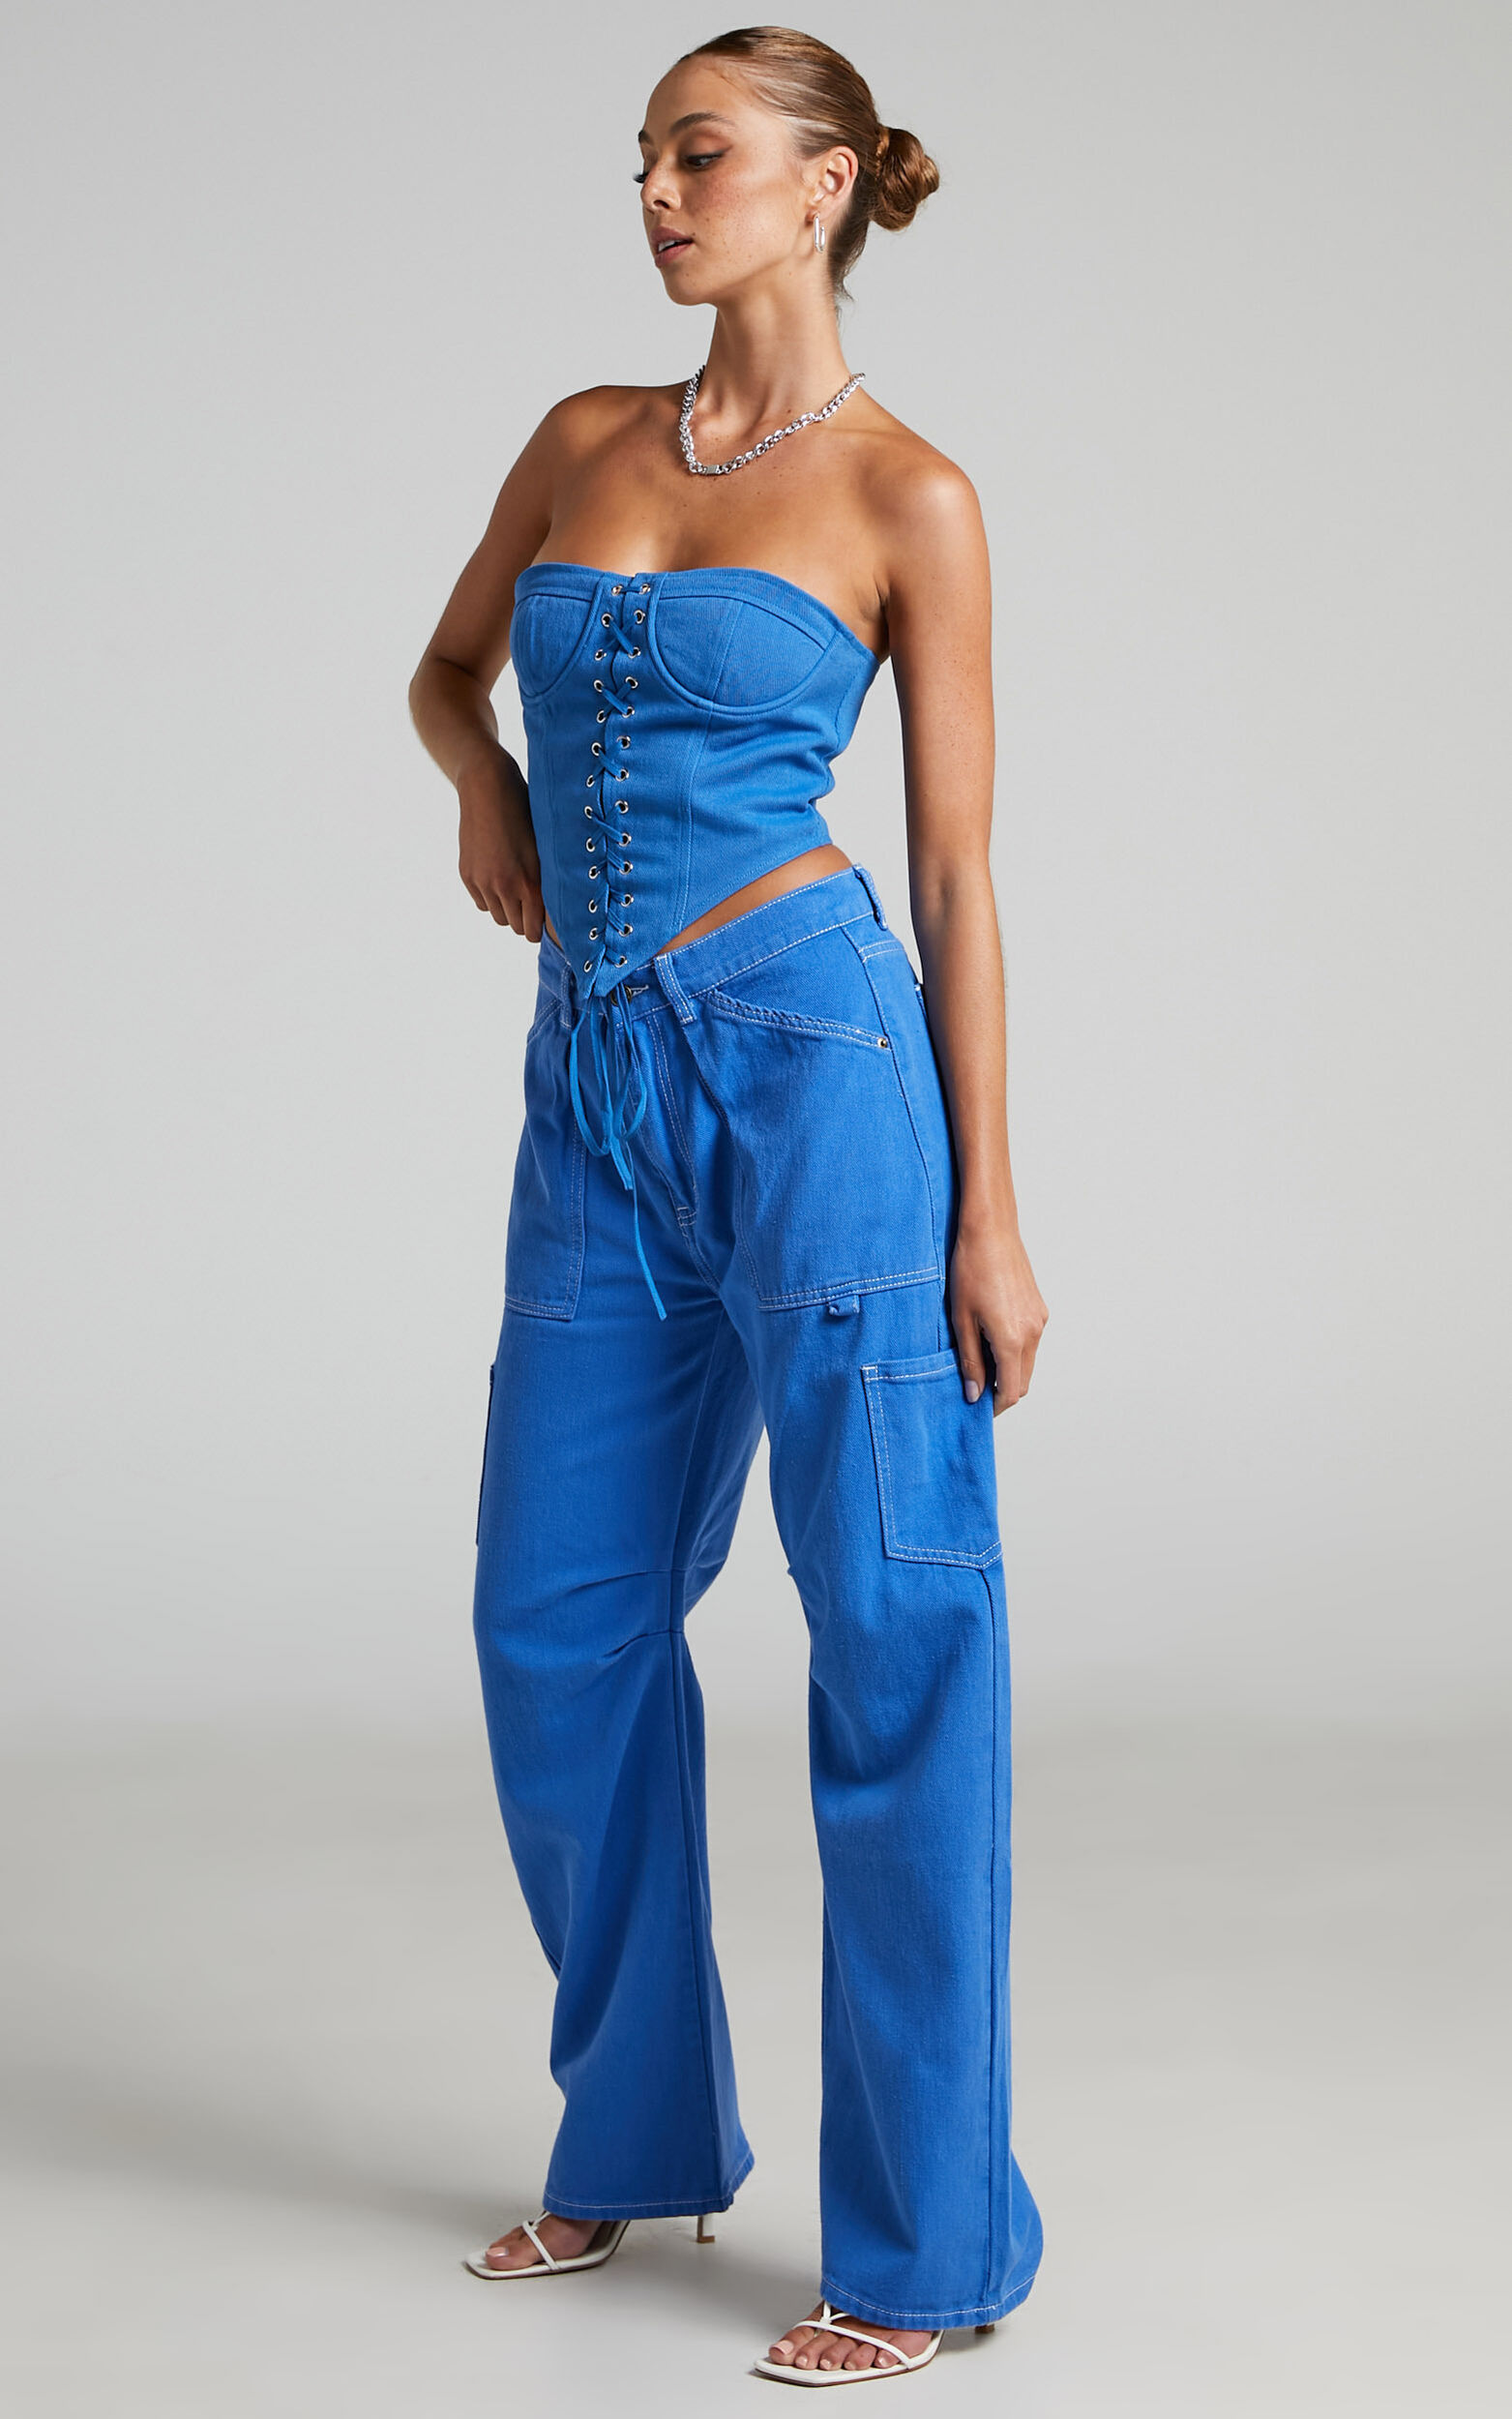 Lioness Miami Vice Pant in Blue | Size Large | 100% Cotton | American Threads